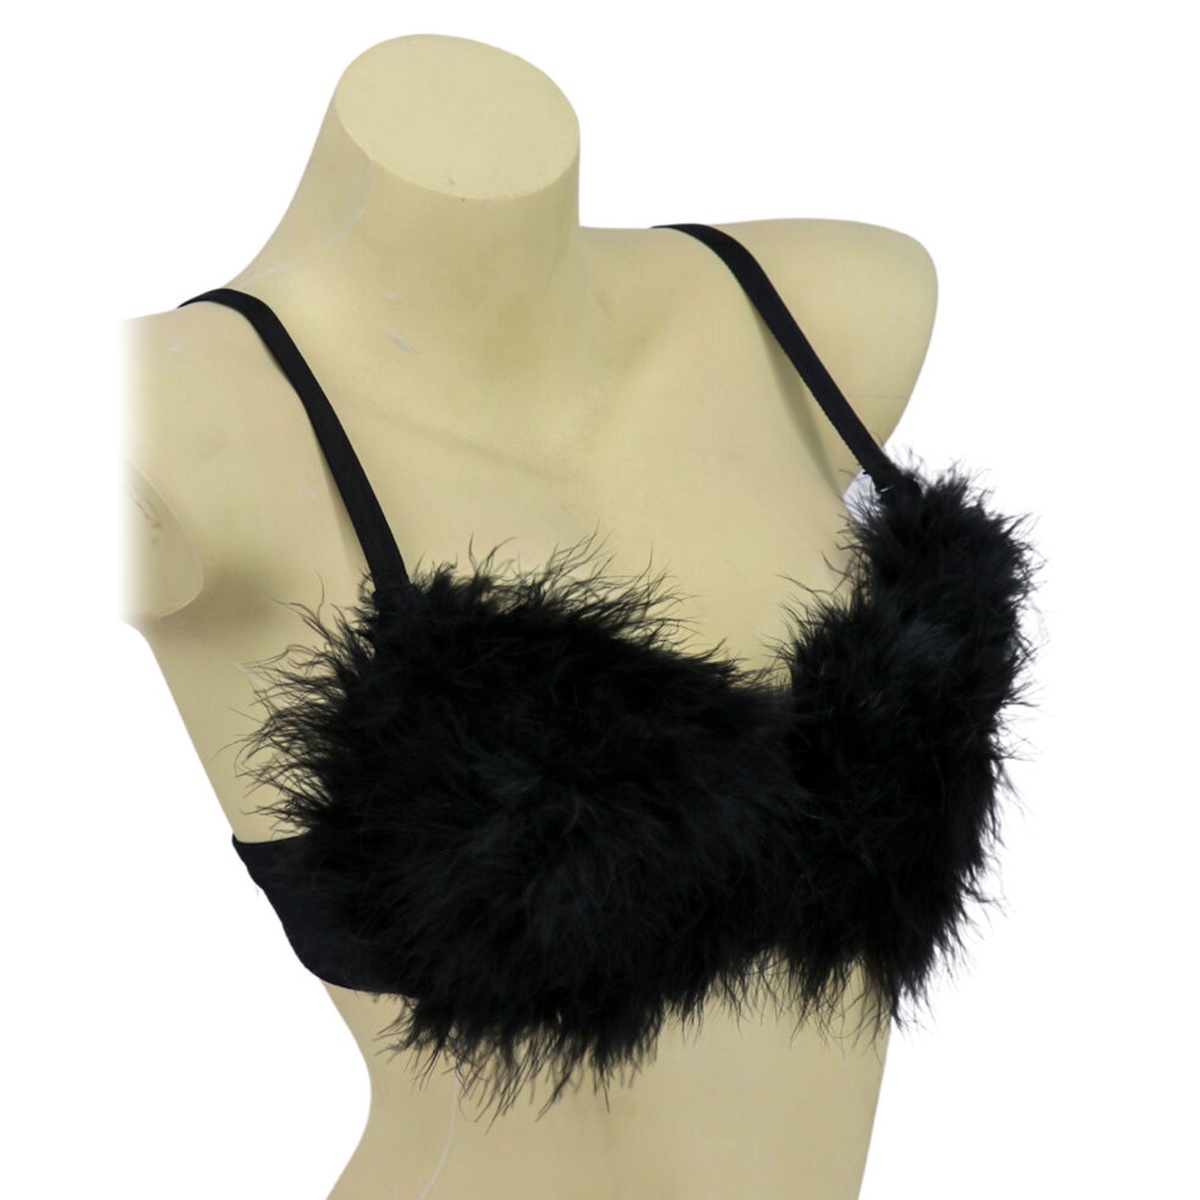 Feather Bras: Standing Out from the Crowd with Avant-Garde Lingerie